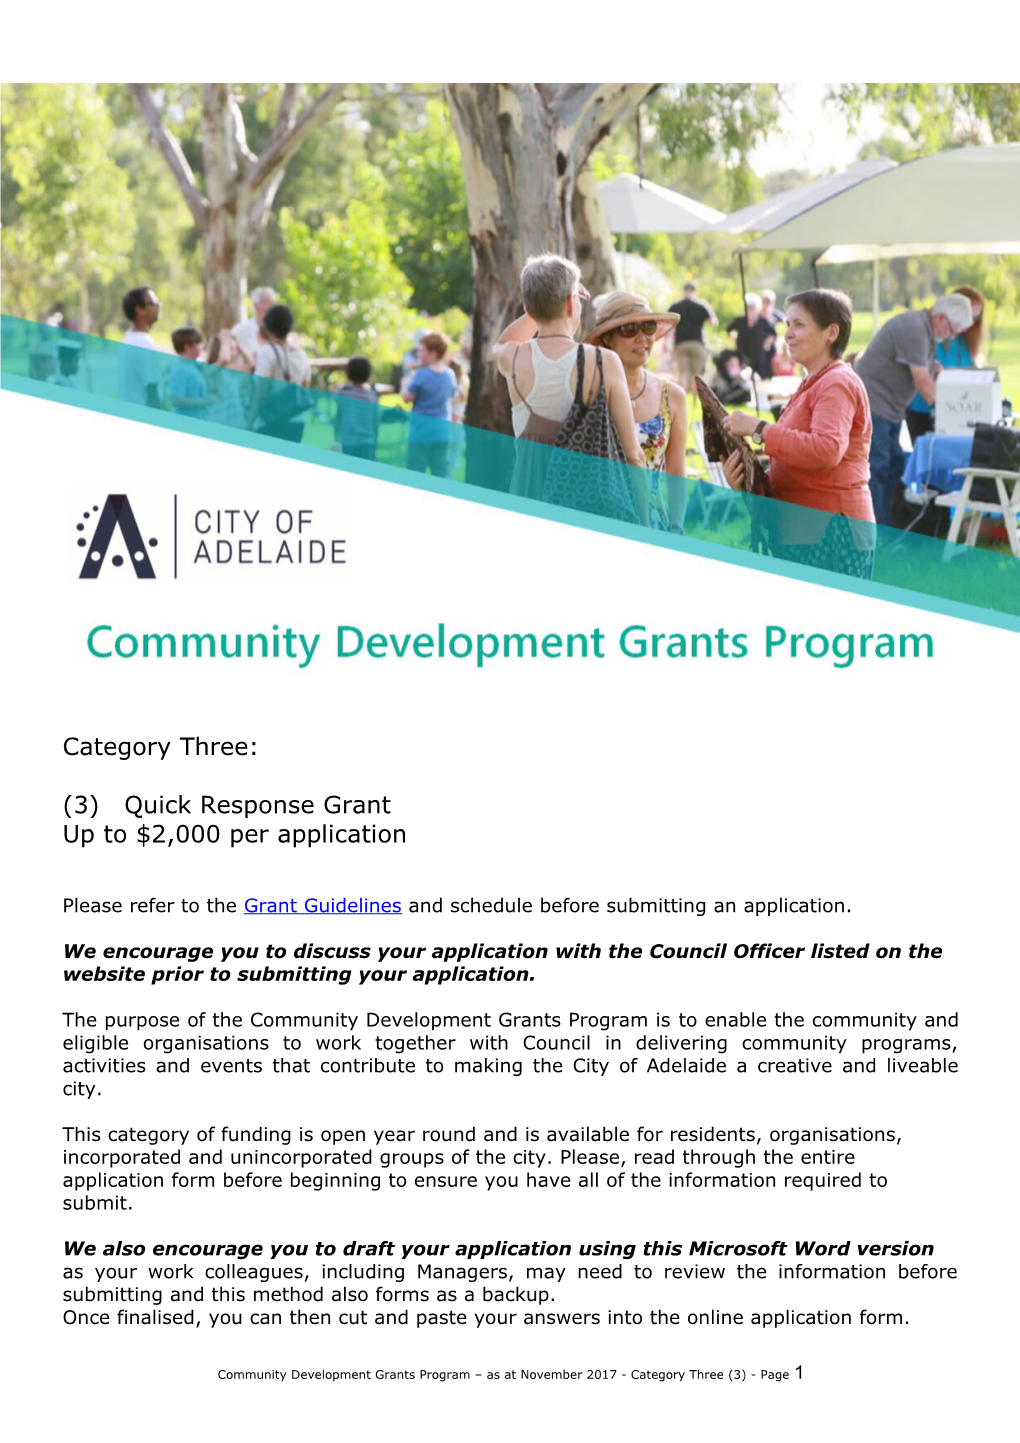 Please Refer to the Grant Guidelines and Schedule Before Submitting an Application